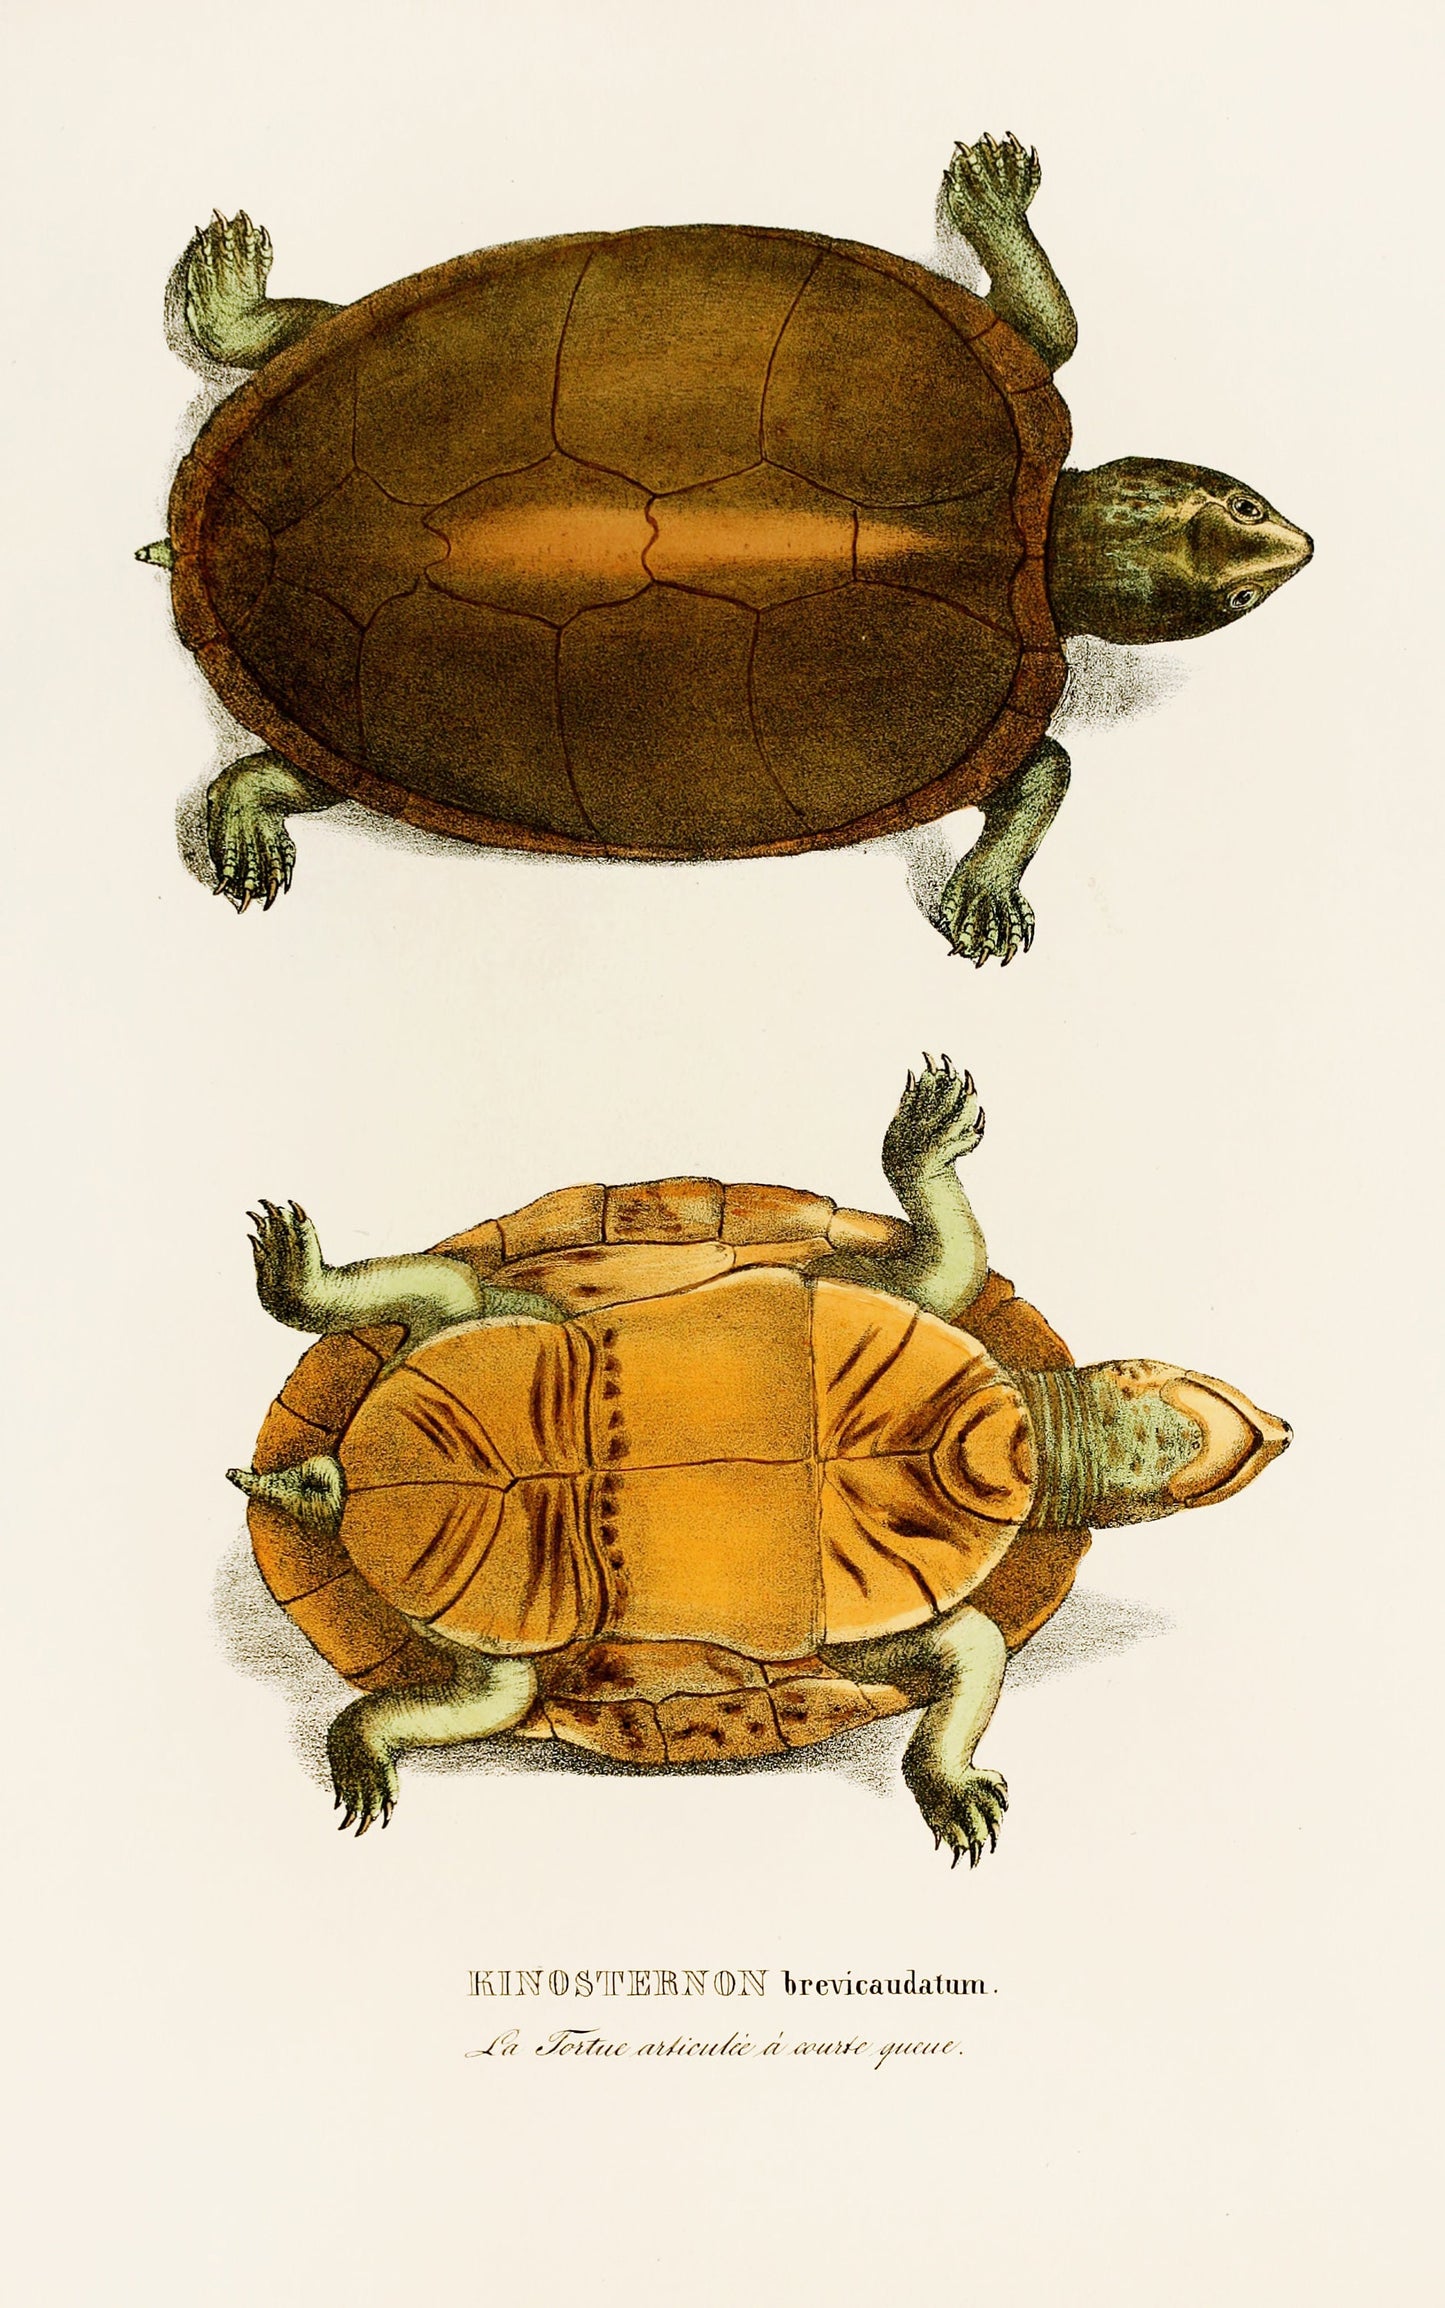 A New Species of Turtle [17 Images]